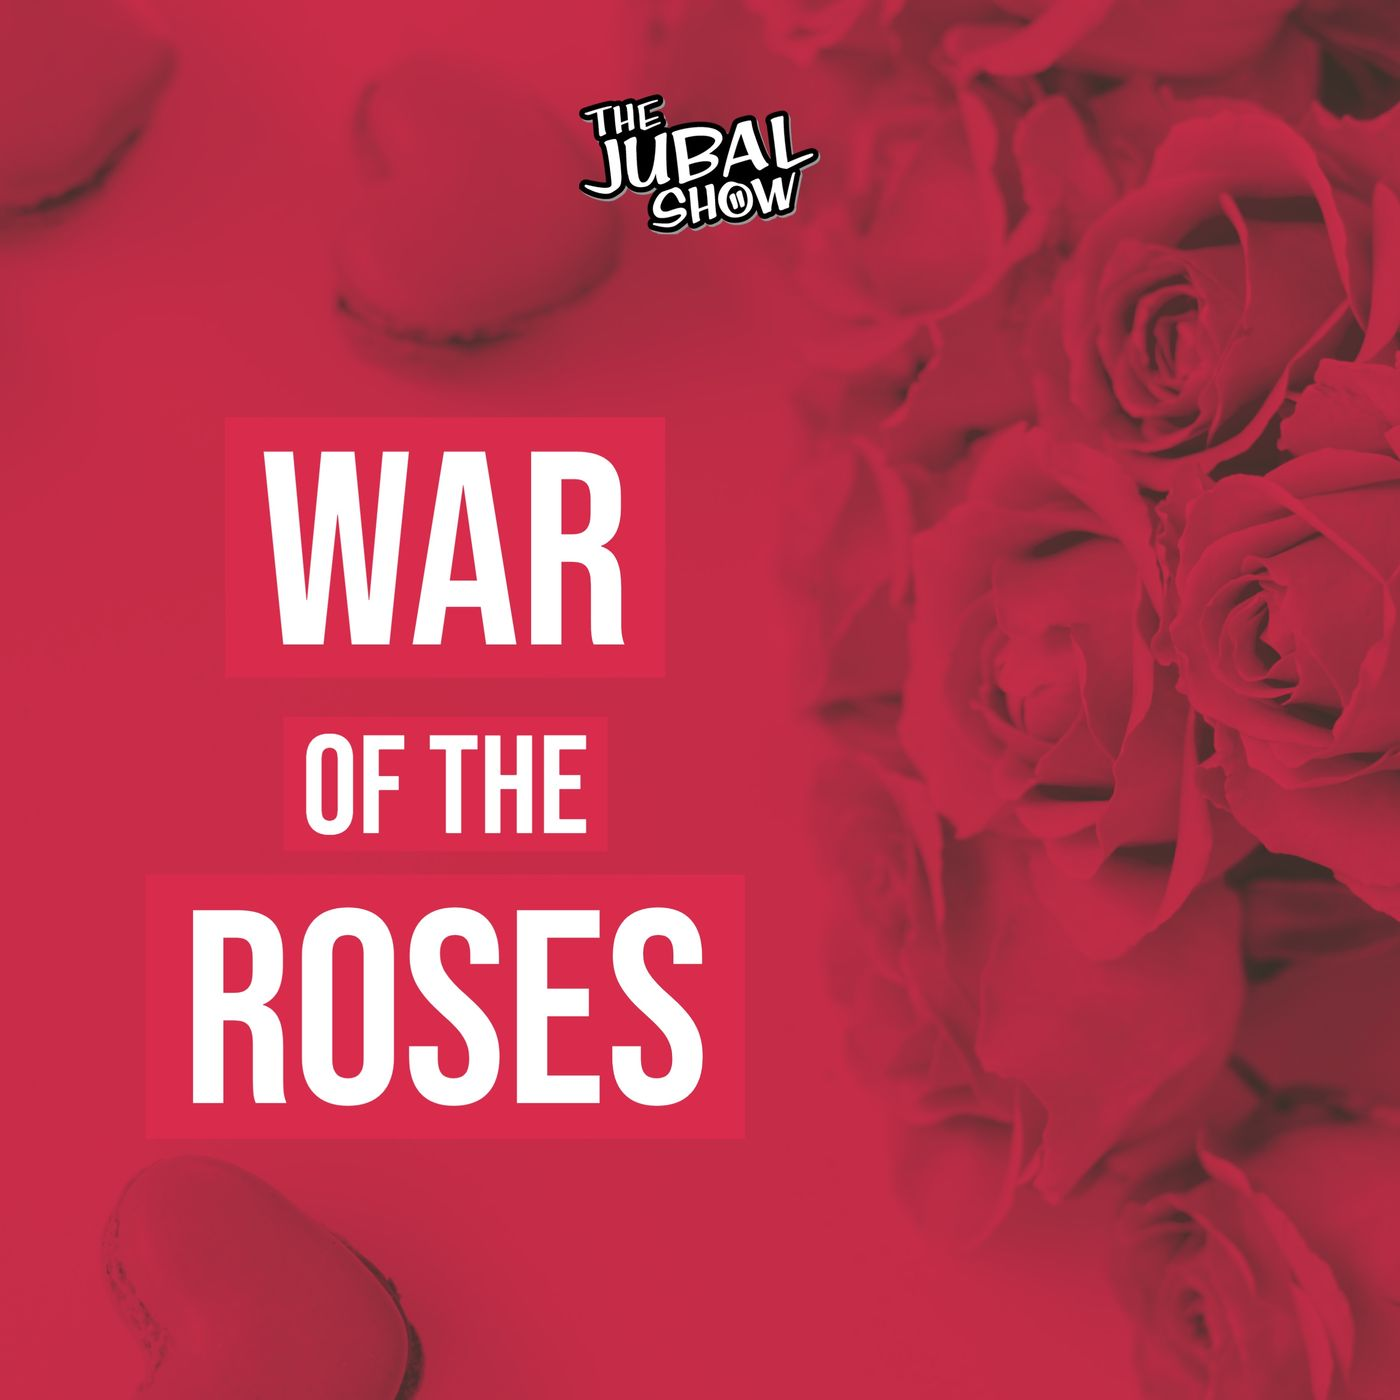 We're about to find out if you can trust dog lovers in this War of the Roses!